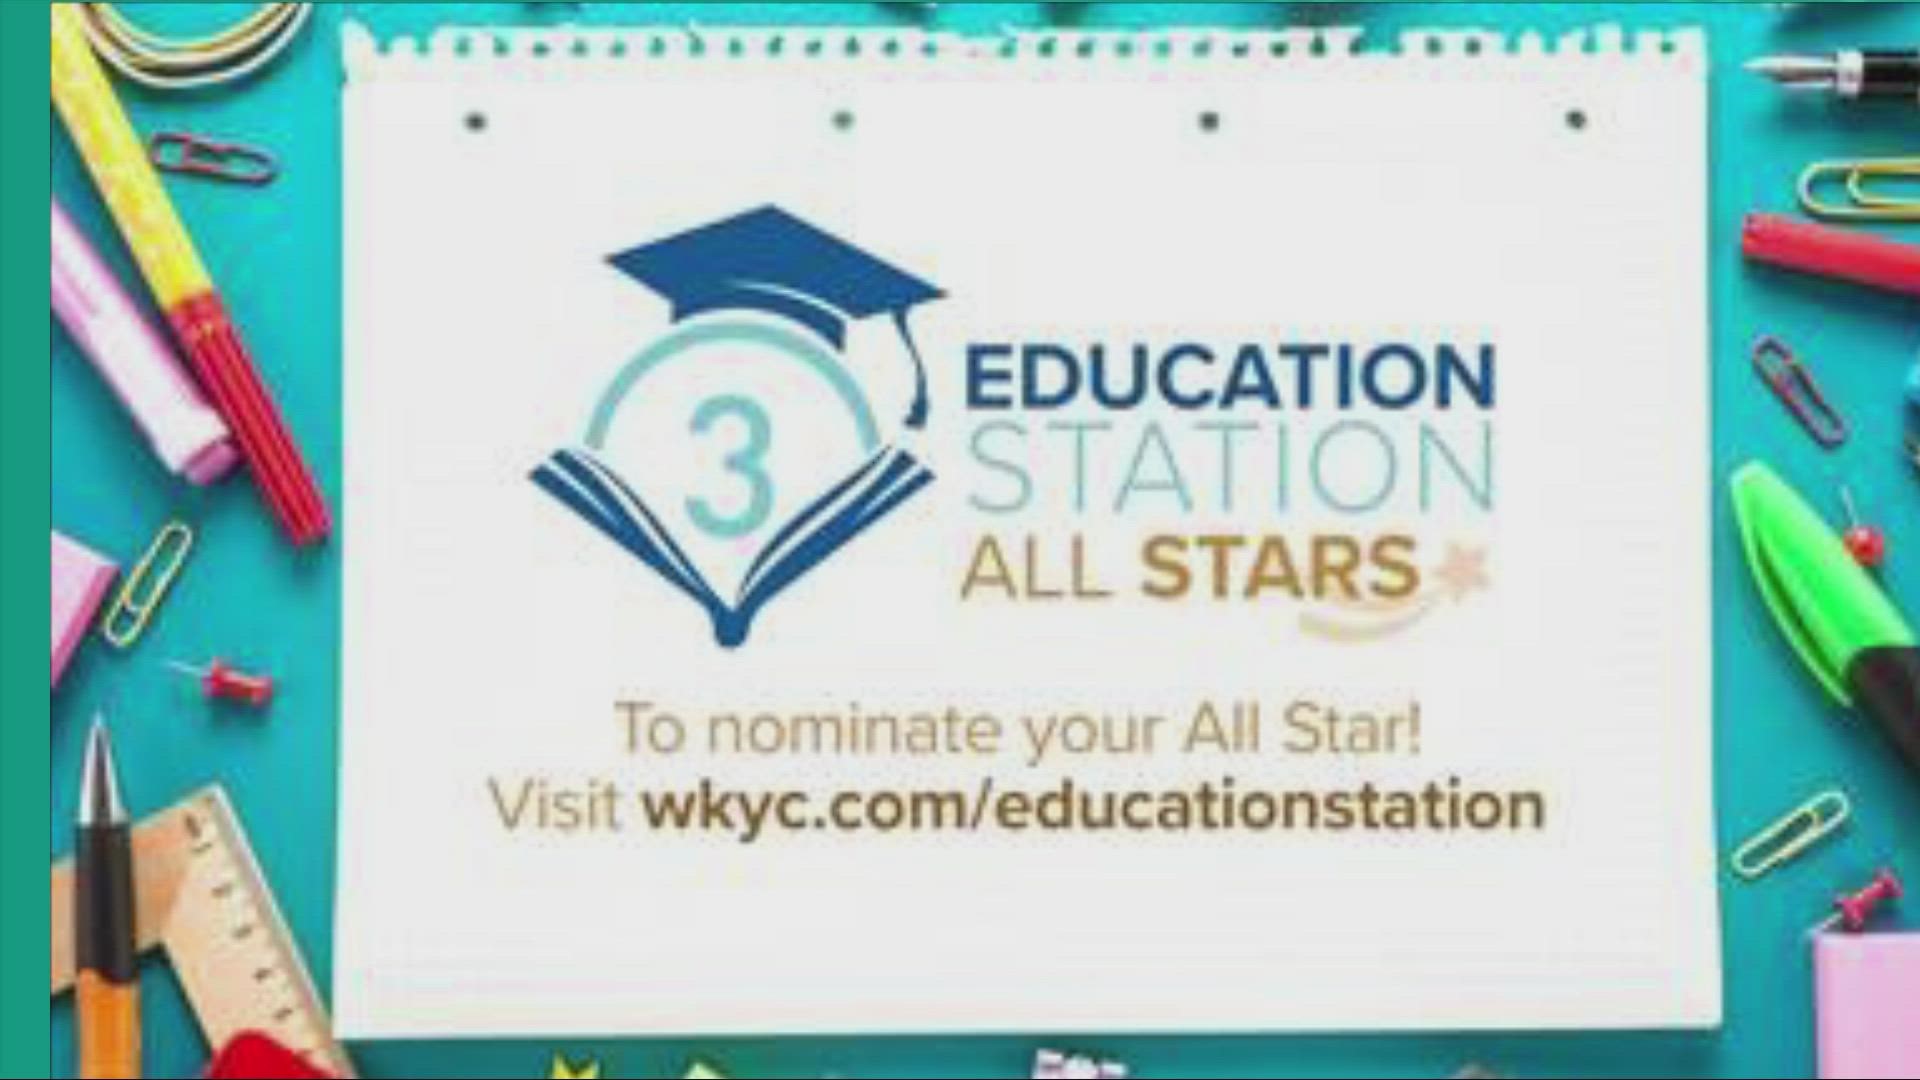 We want to recognize those making a big difference for students as a 3News Education All-Star. Tell us about the best education you know.